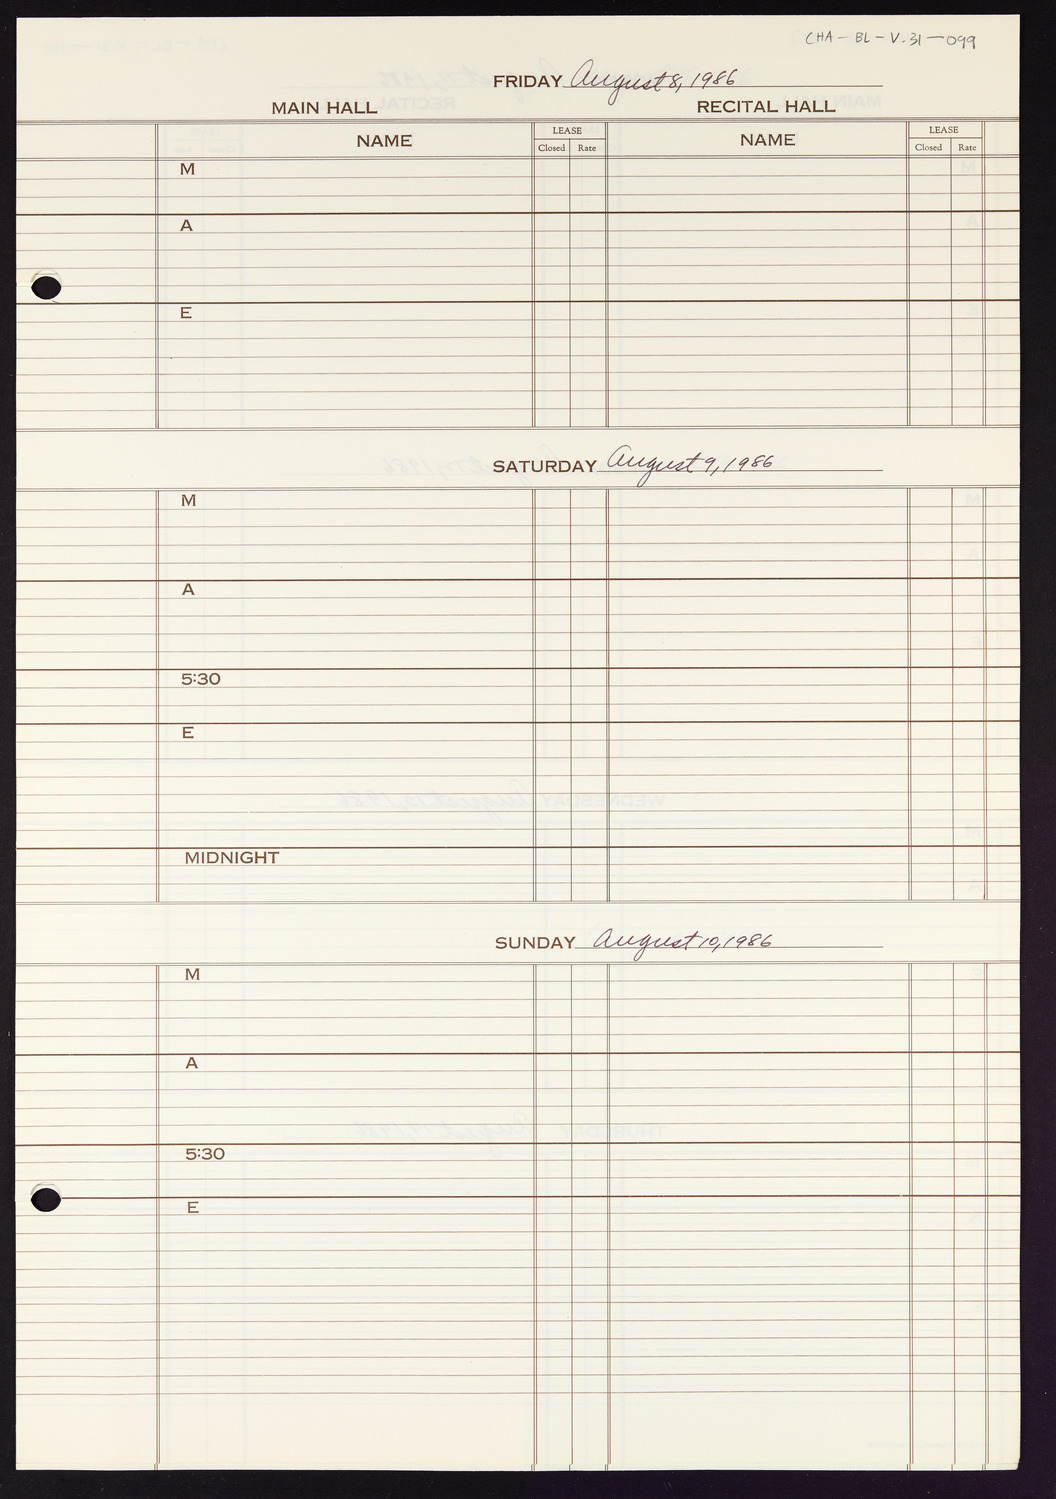 Carnegie Hall Booking Ledger, volume 31, page 99